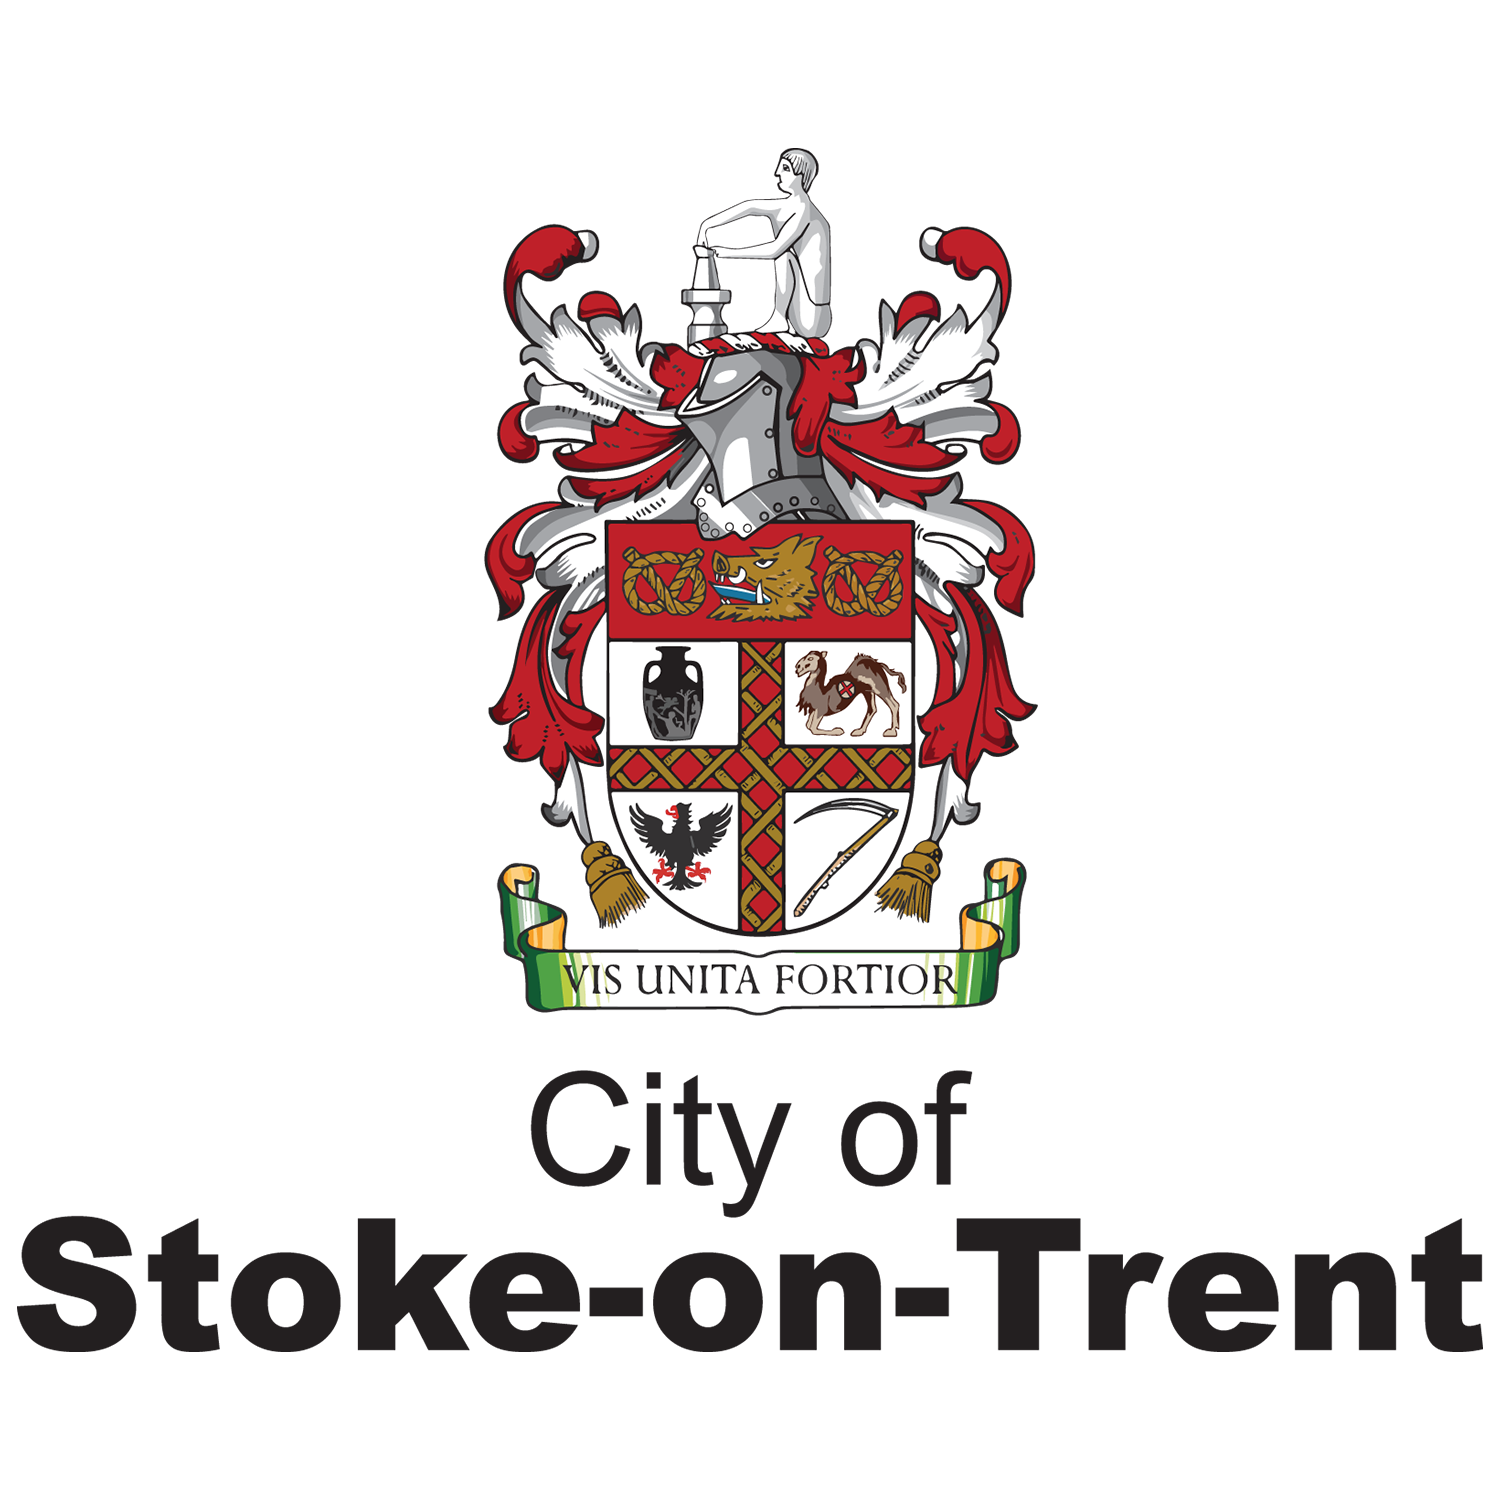 Councillor Jane Ashworth, Leader of Stoke-on-Trent City Council